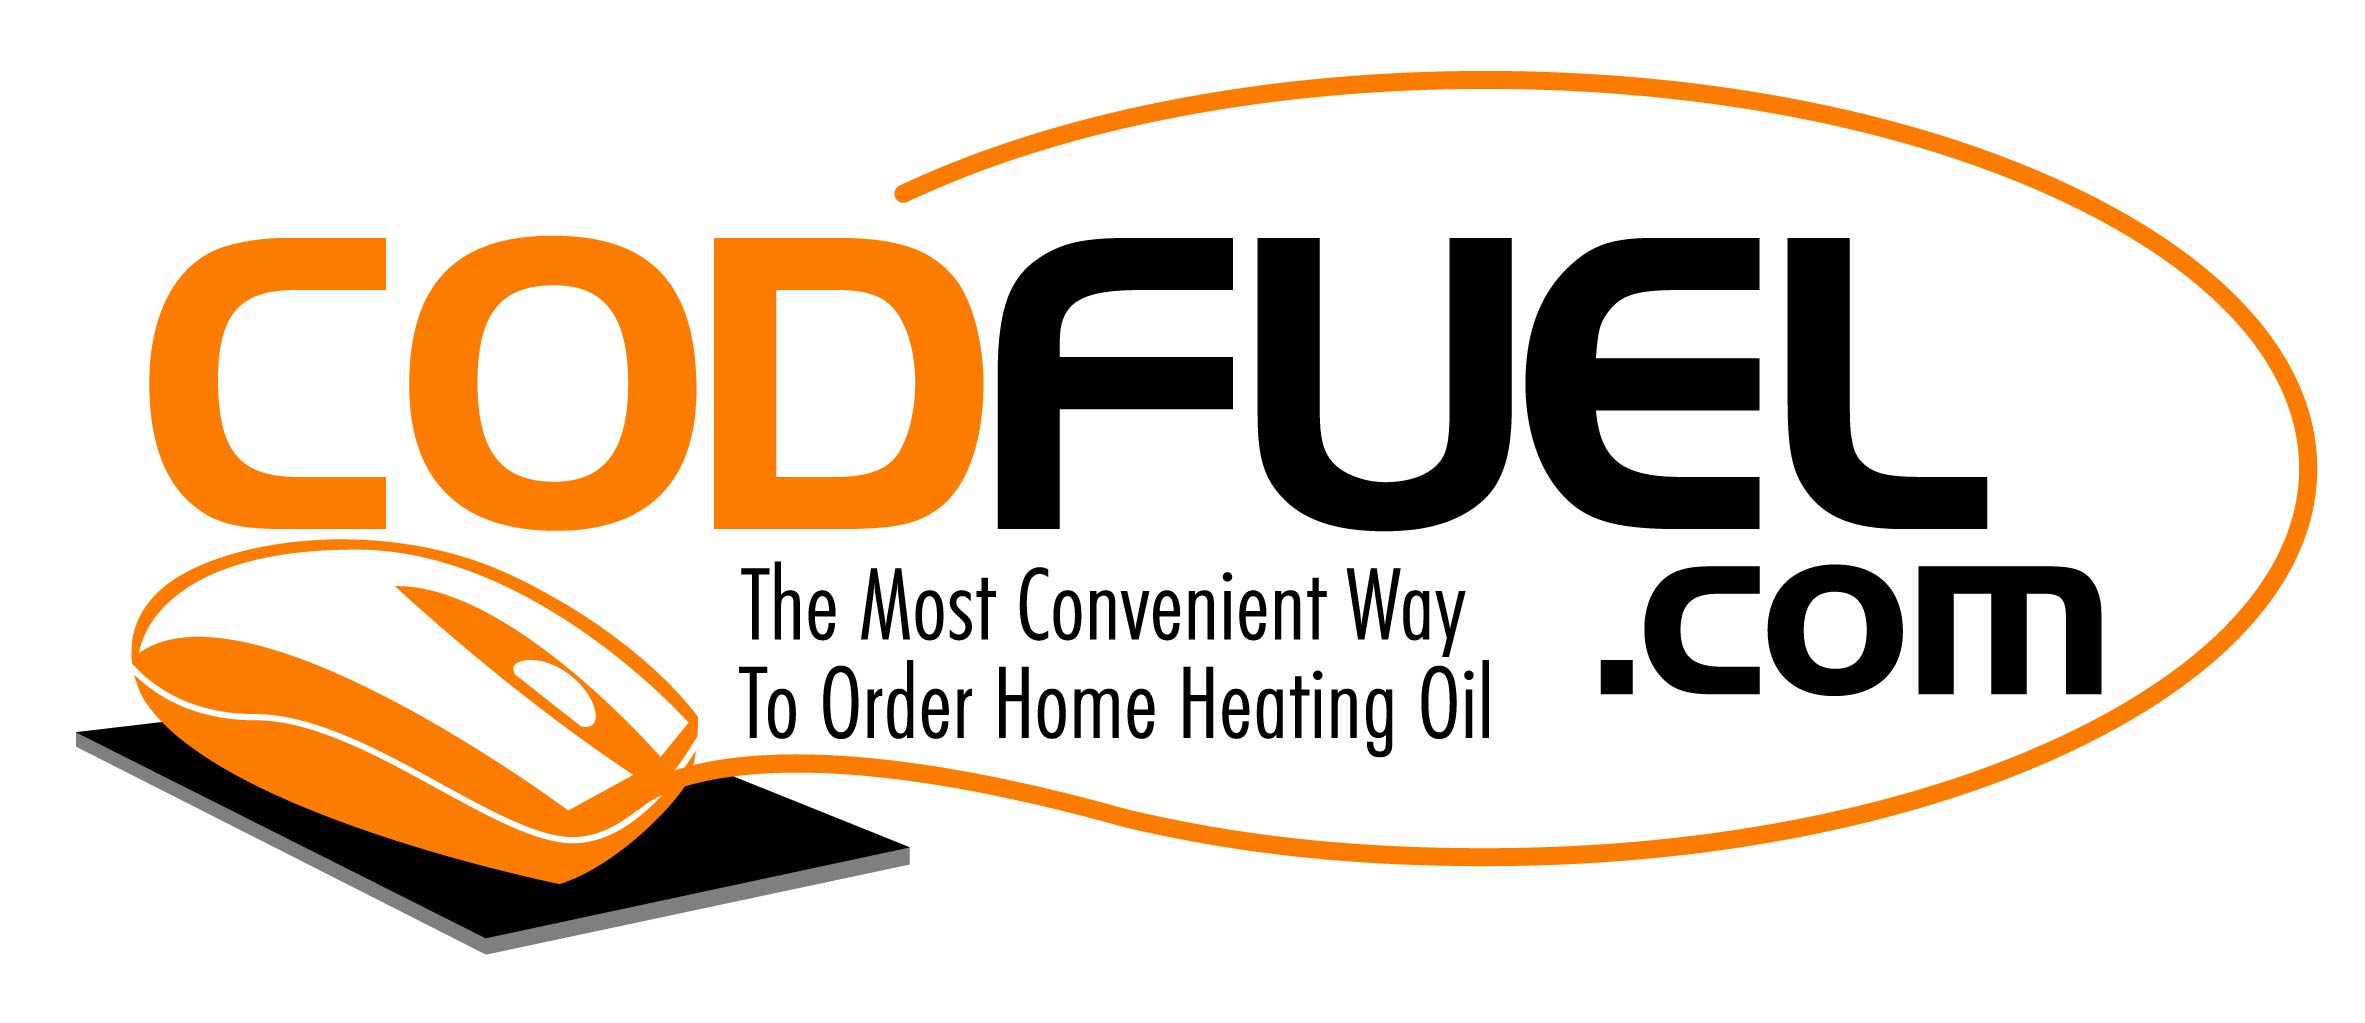 Heating Oil Prices Choose Your Own Fuel Oil Price